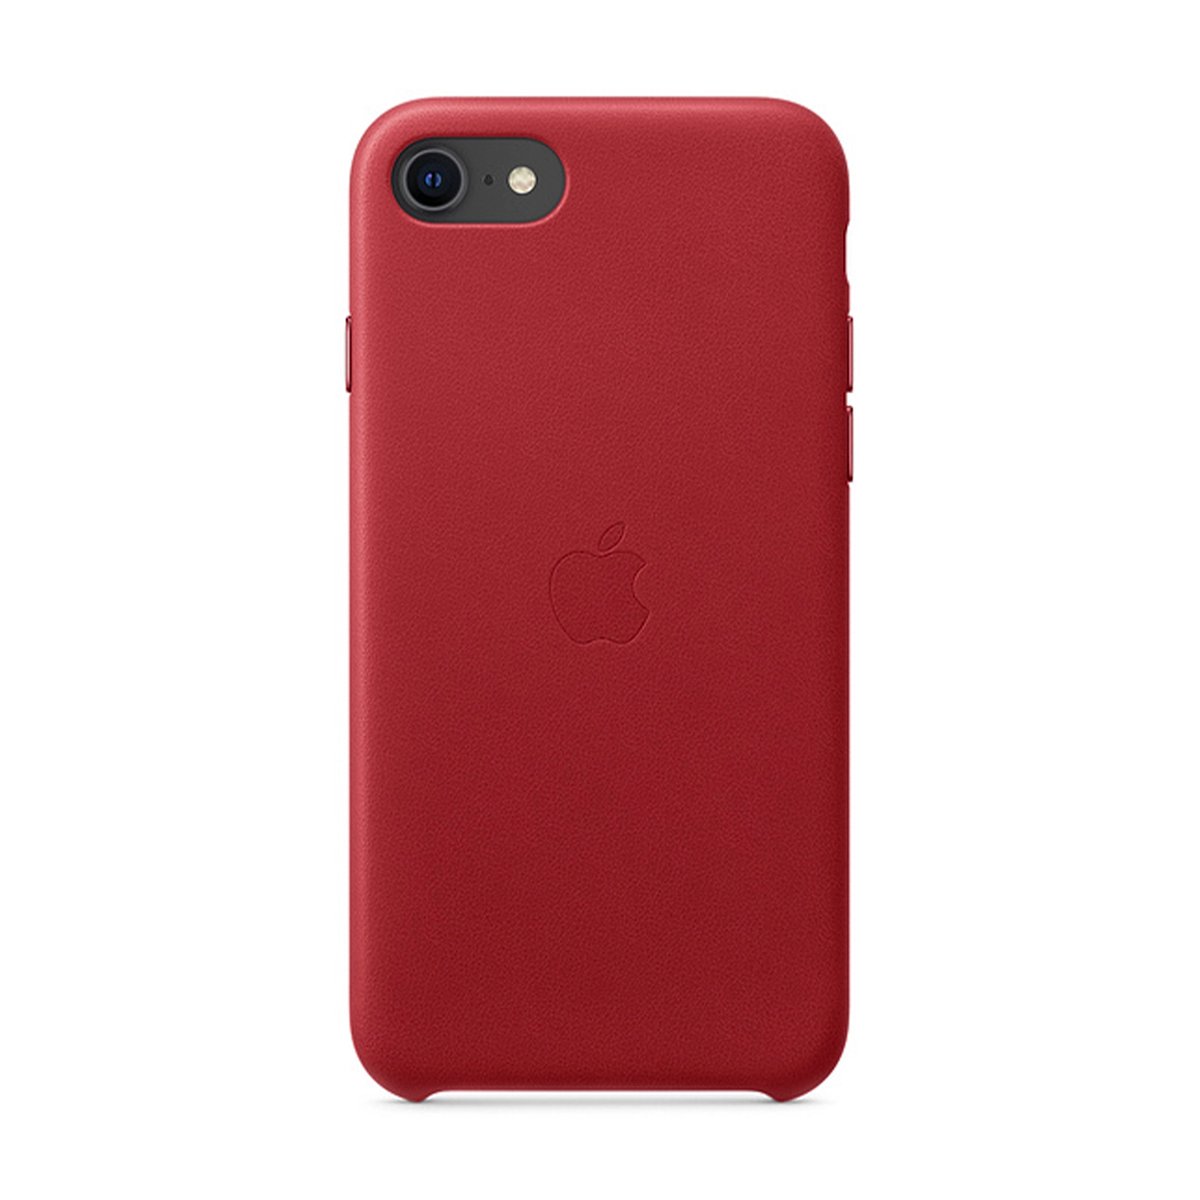 iPhone SE Leather Case - (PRODUCT)RED